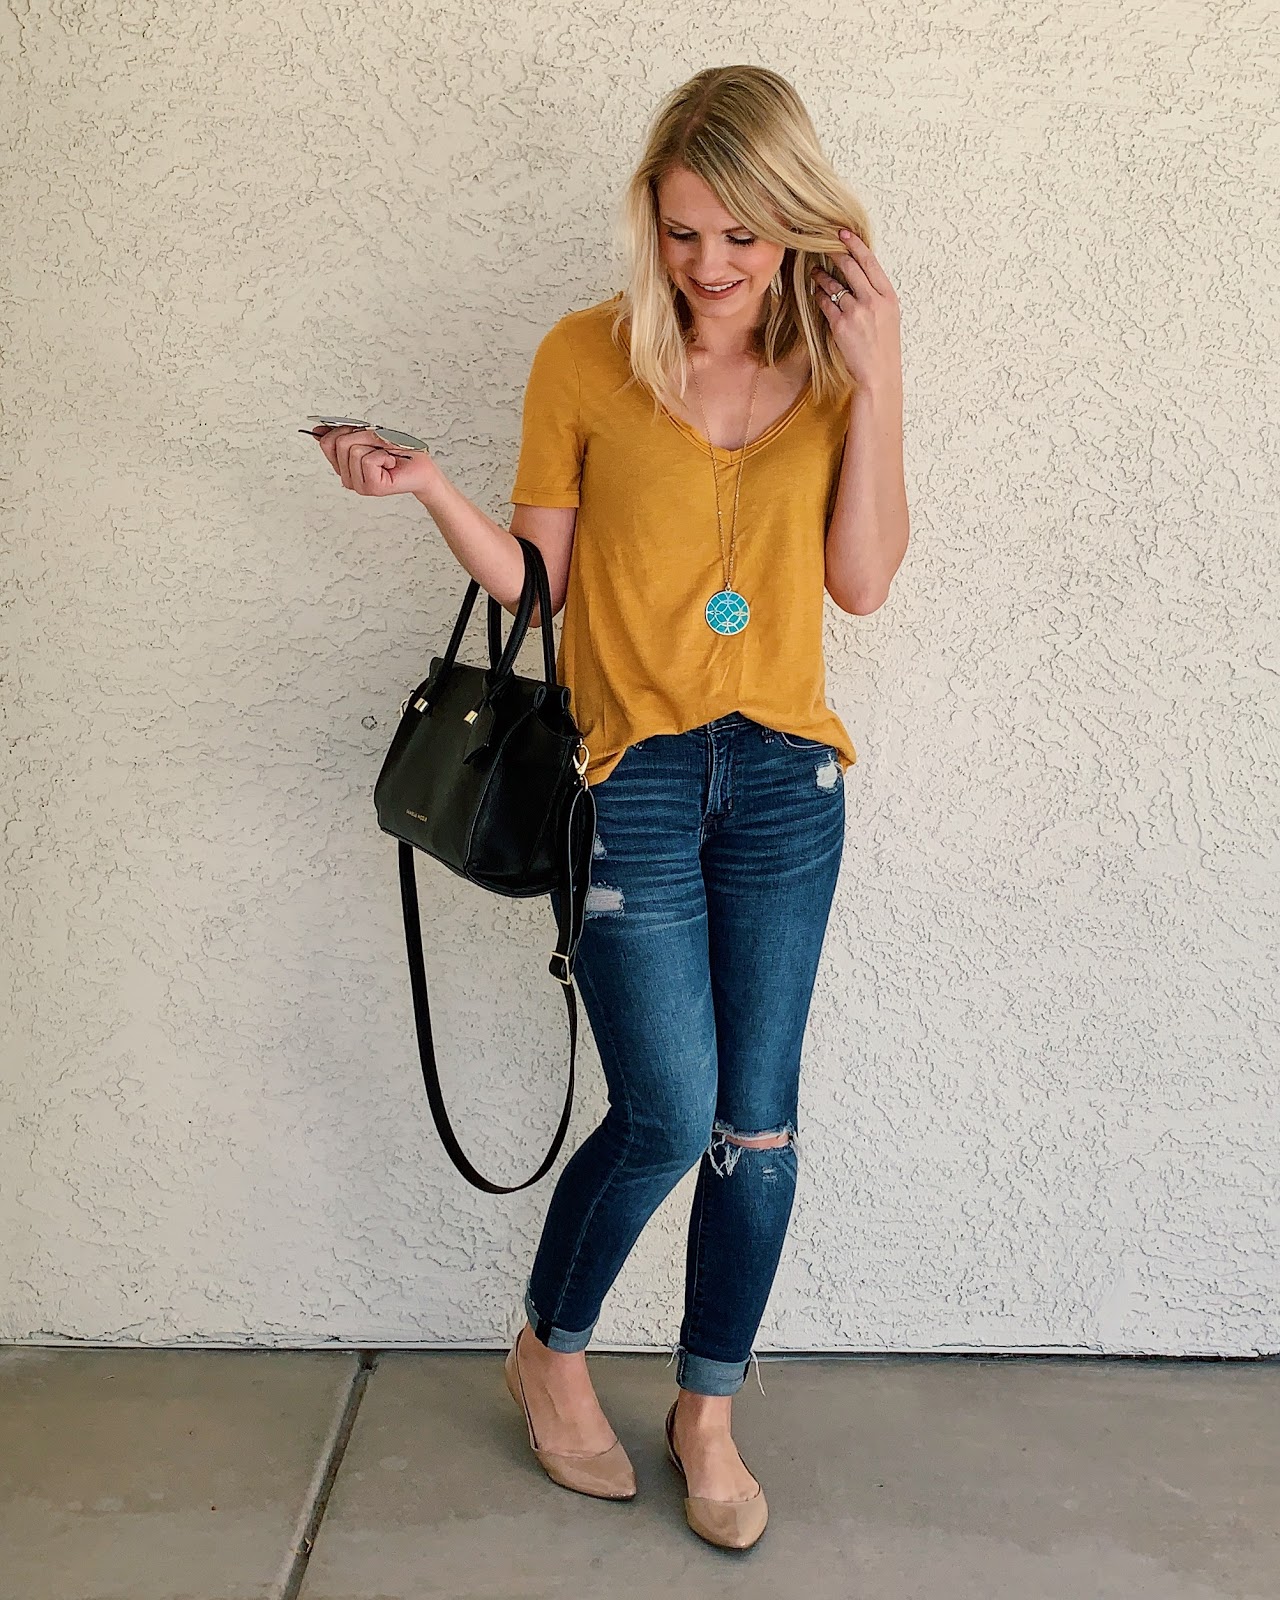 yellow t shirt outfit